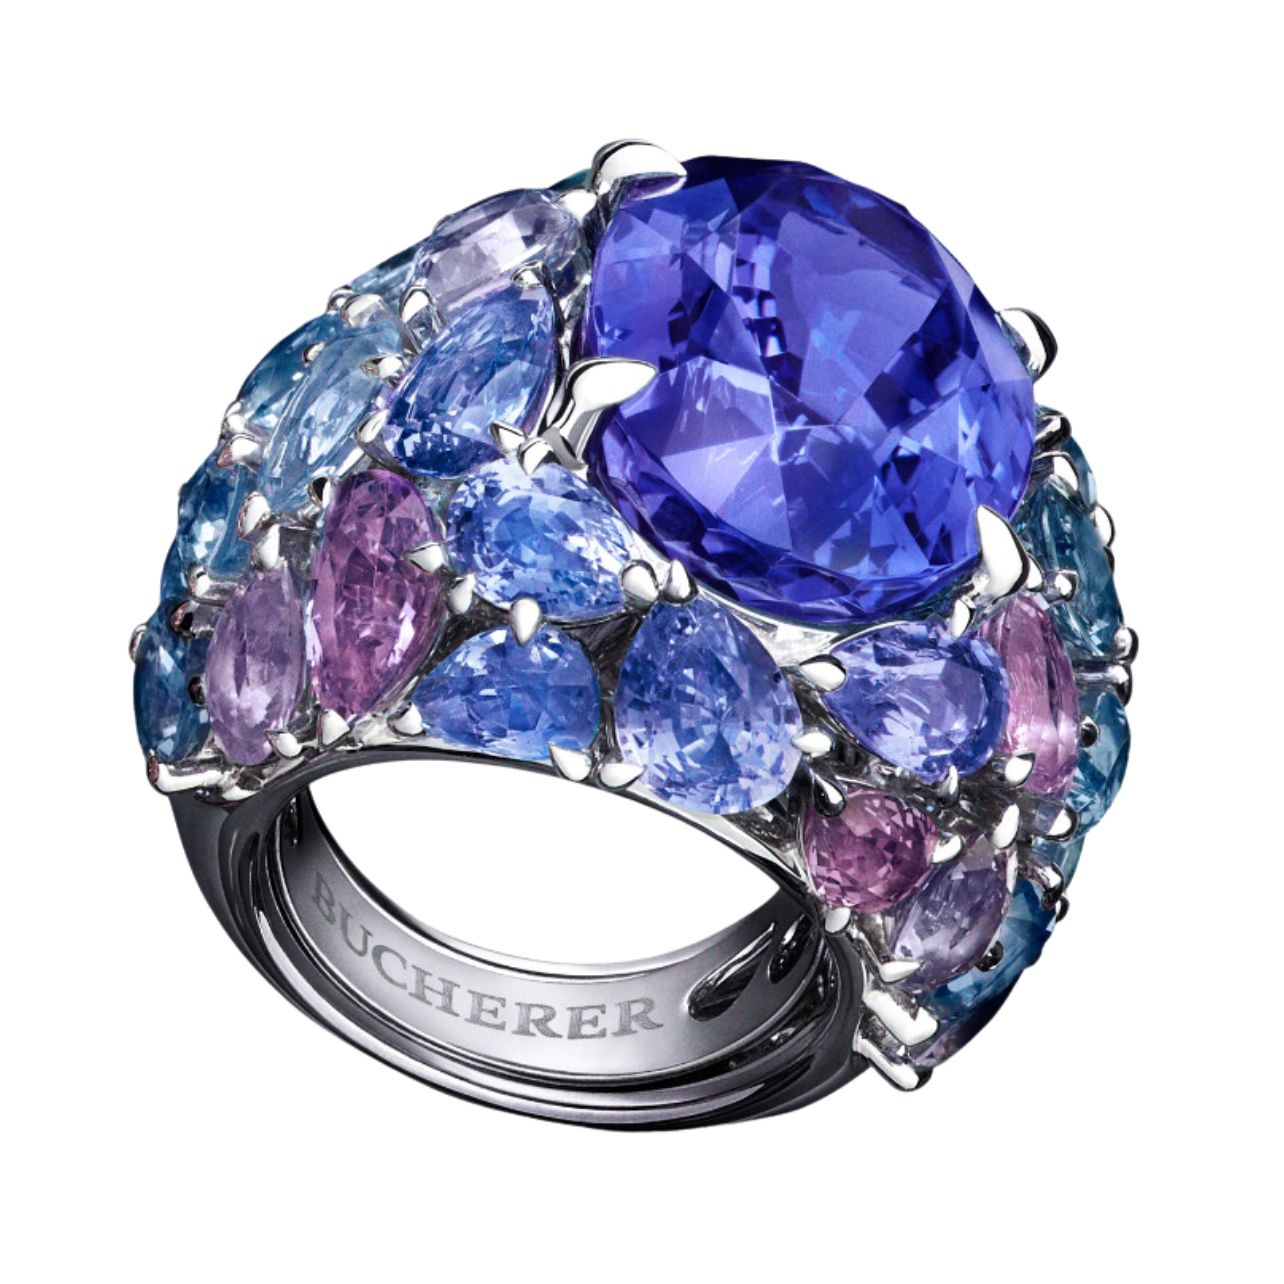 Sparkle cocktail ring featuring a 23.56ct oval-cut tanzanite.